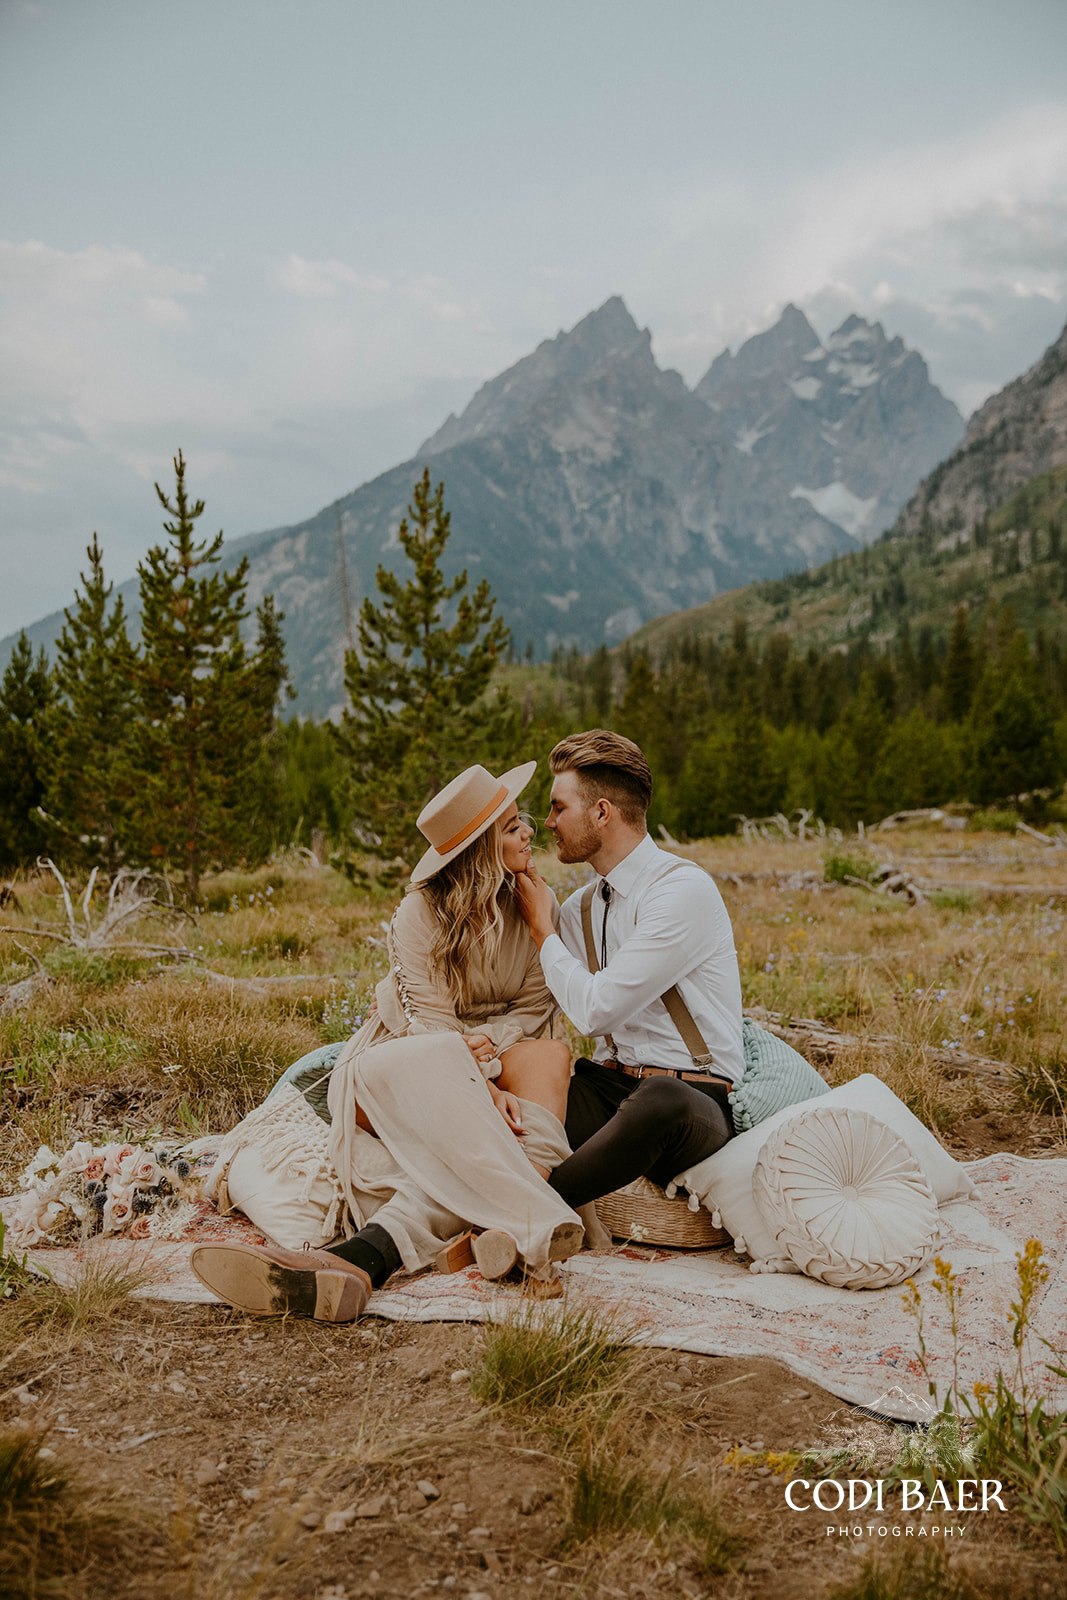 The Tetons is a great place for a resort wedding. This bride and groom enjoyed scenic backdrops for their wedding.